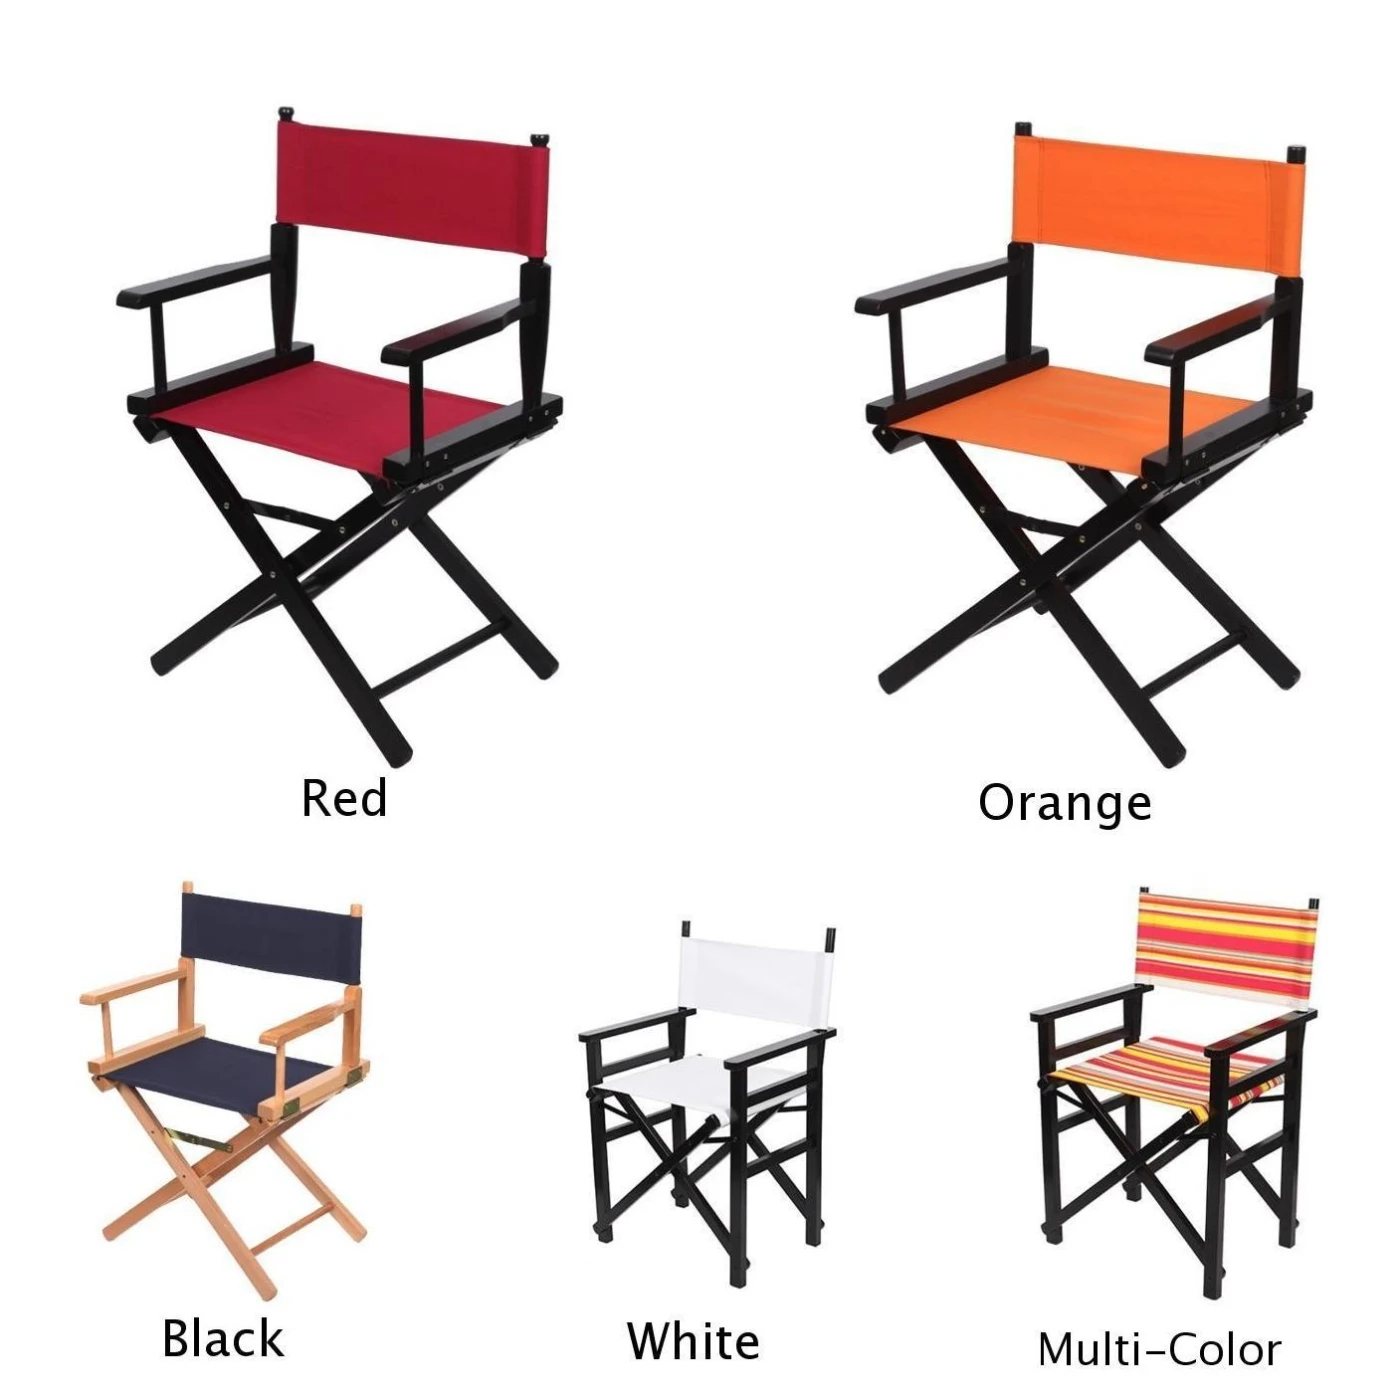 1 * Set Of Chairs Cover	Outdoor Furniture For Directors Chairs Cover Outdoor Garden Canvas Seat Covers Replacement